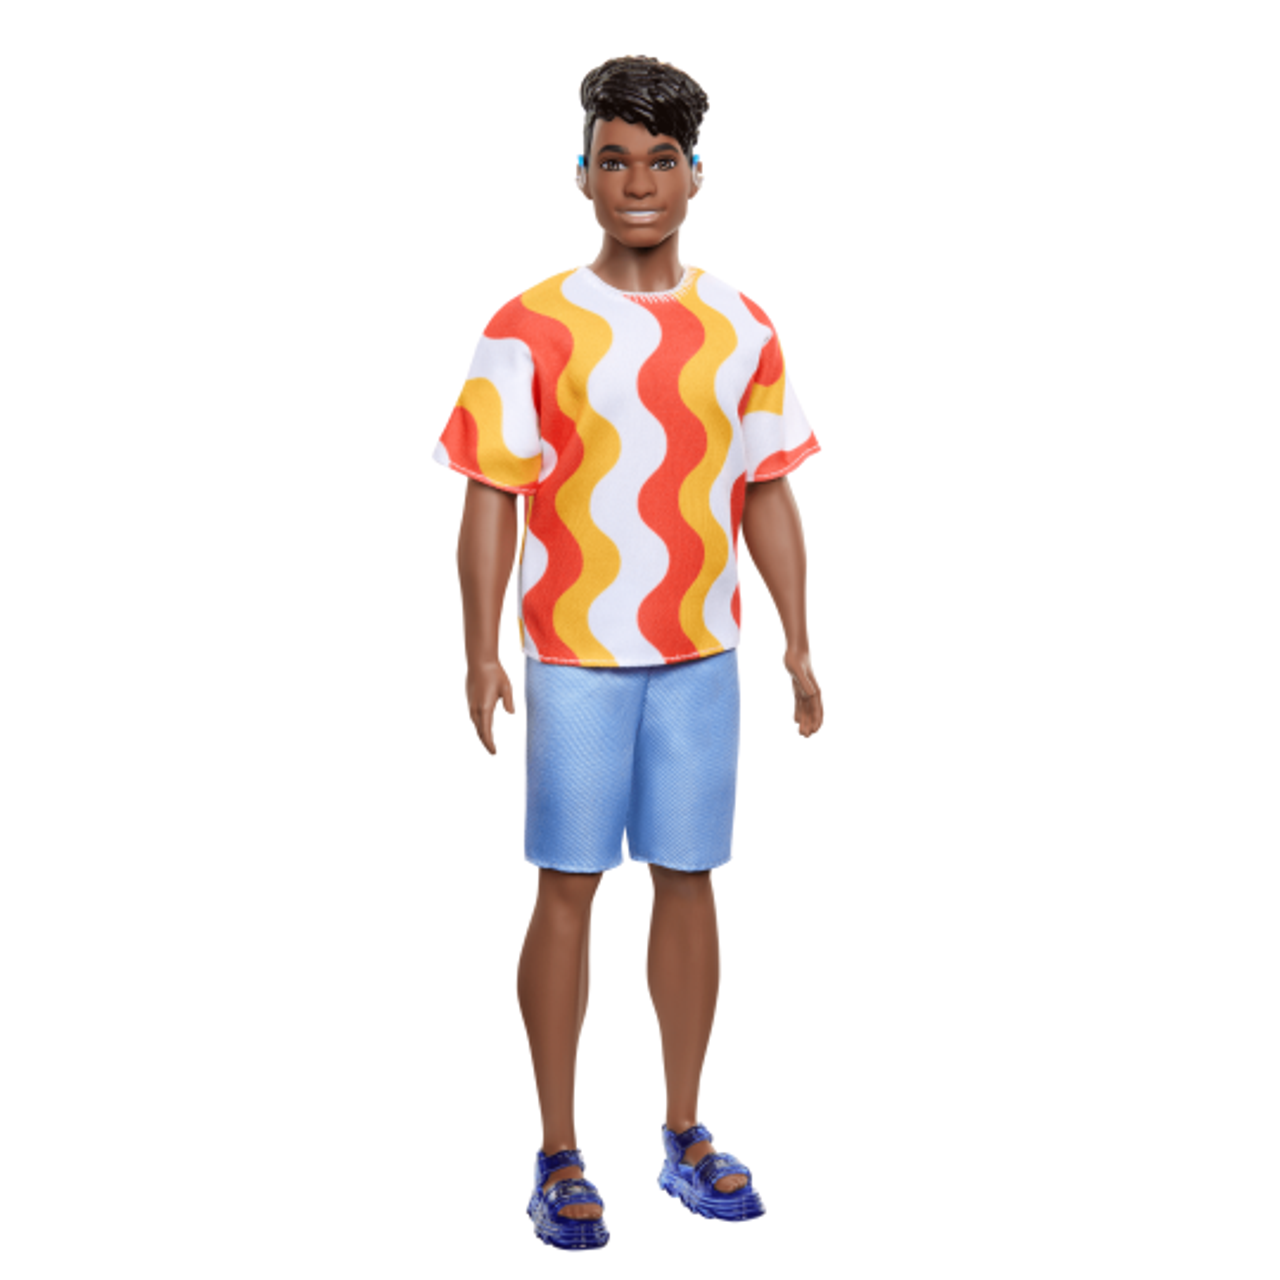 Barbie Fashionistas Ken Doll #219 with Pink and Blue Patterened Shirt